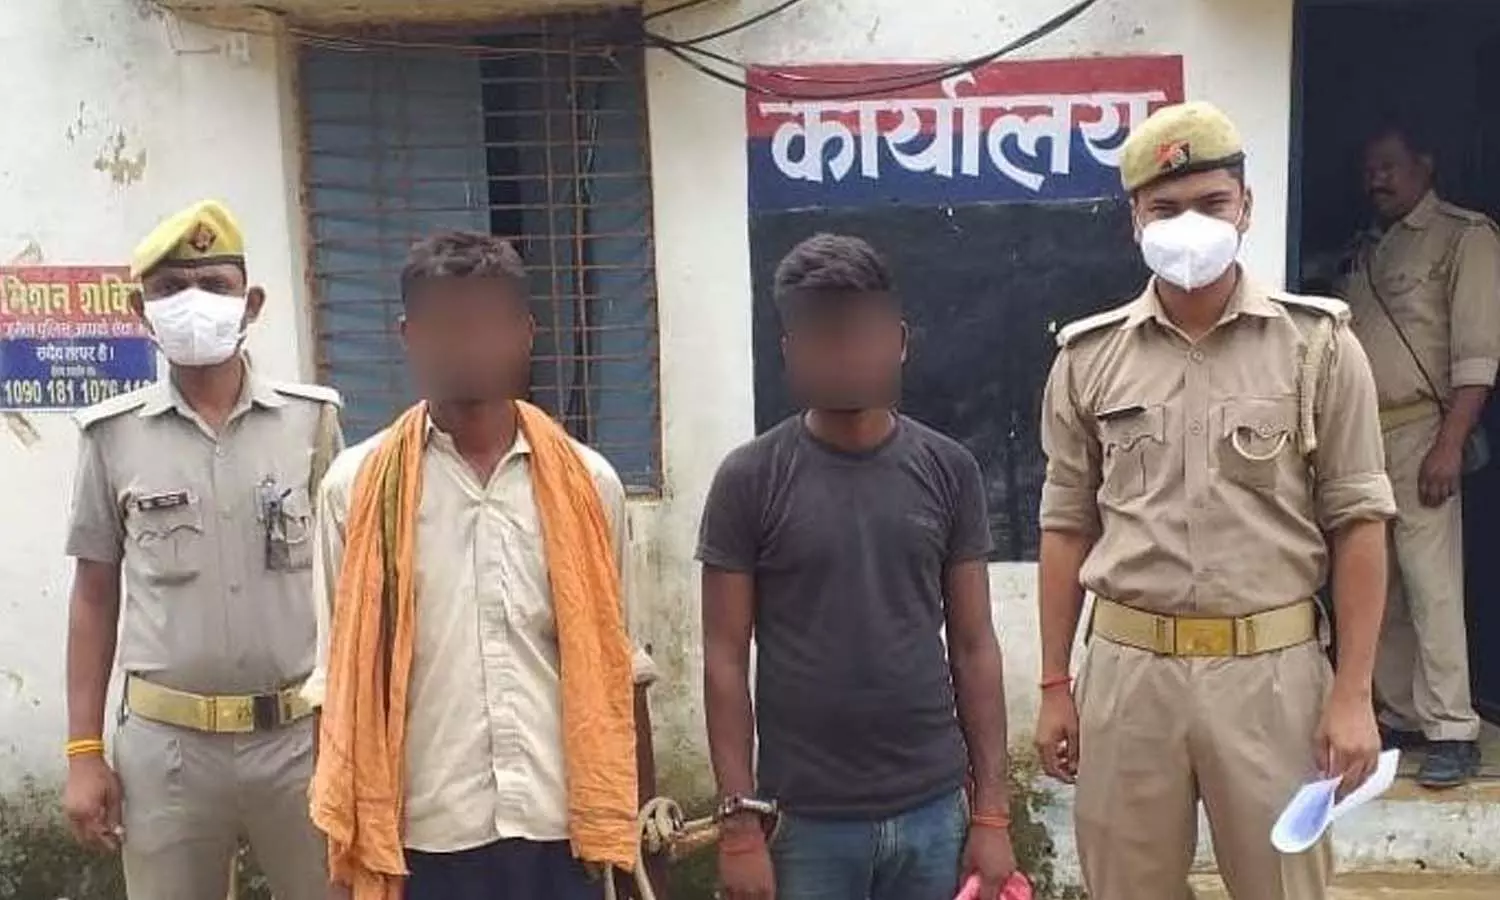 Teenager who came out for defecation gang-raped, two arrested